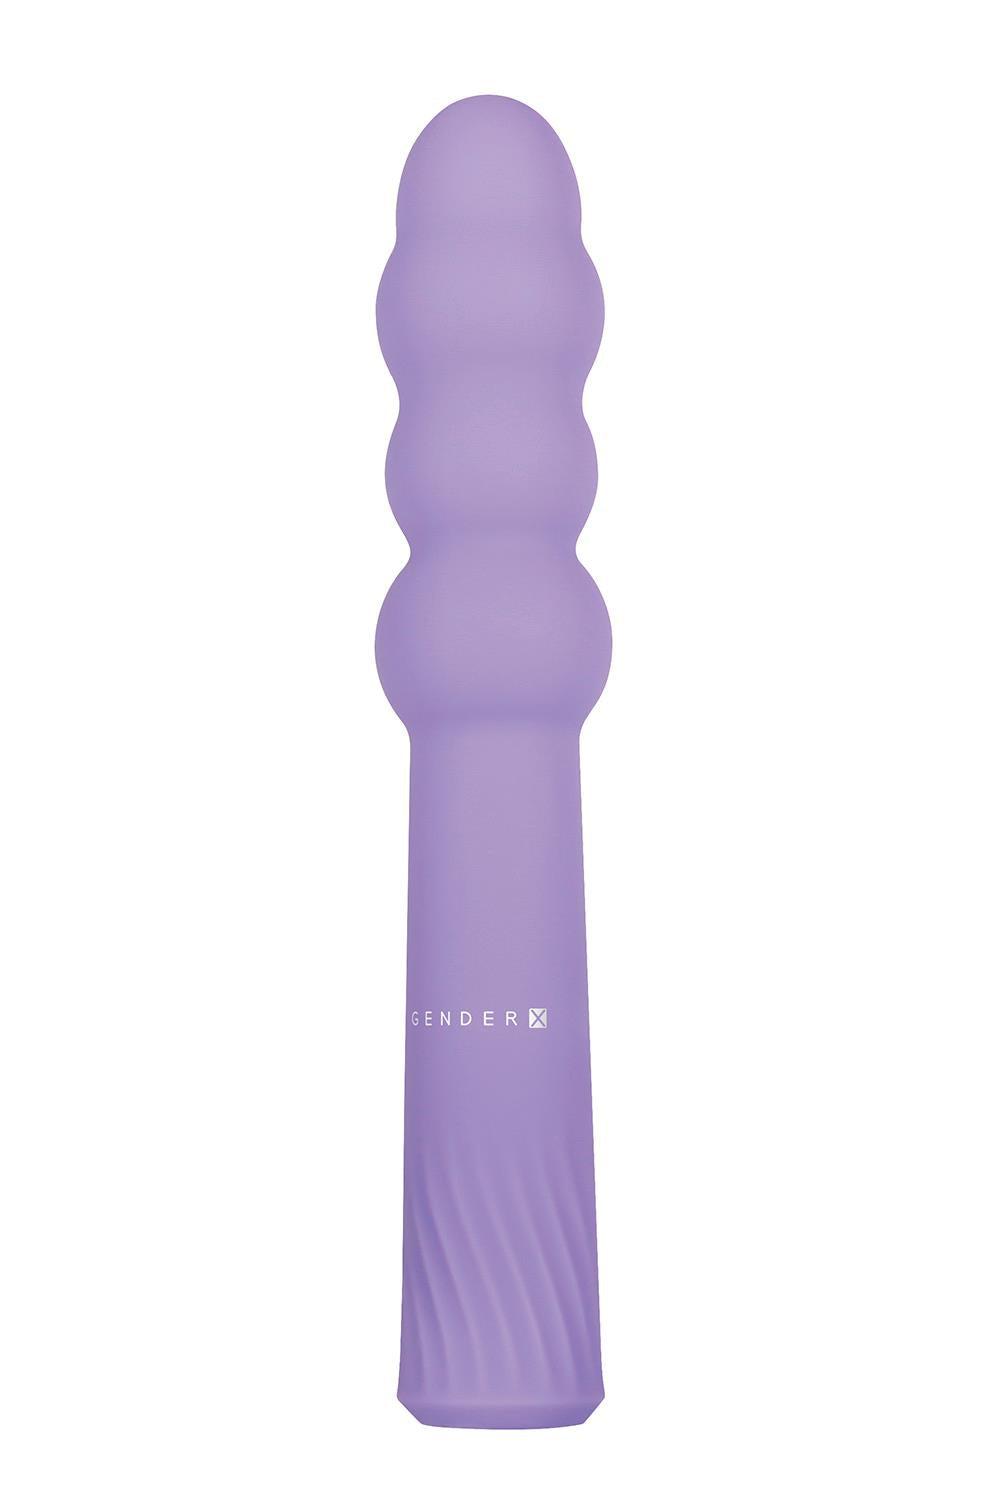 Gender X Bumpy Ride – Adult Sex Toys, Intimate Supplies, Sexual Wellness, Online Sex Store